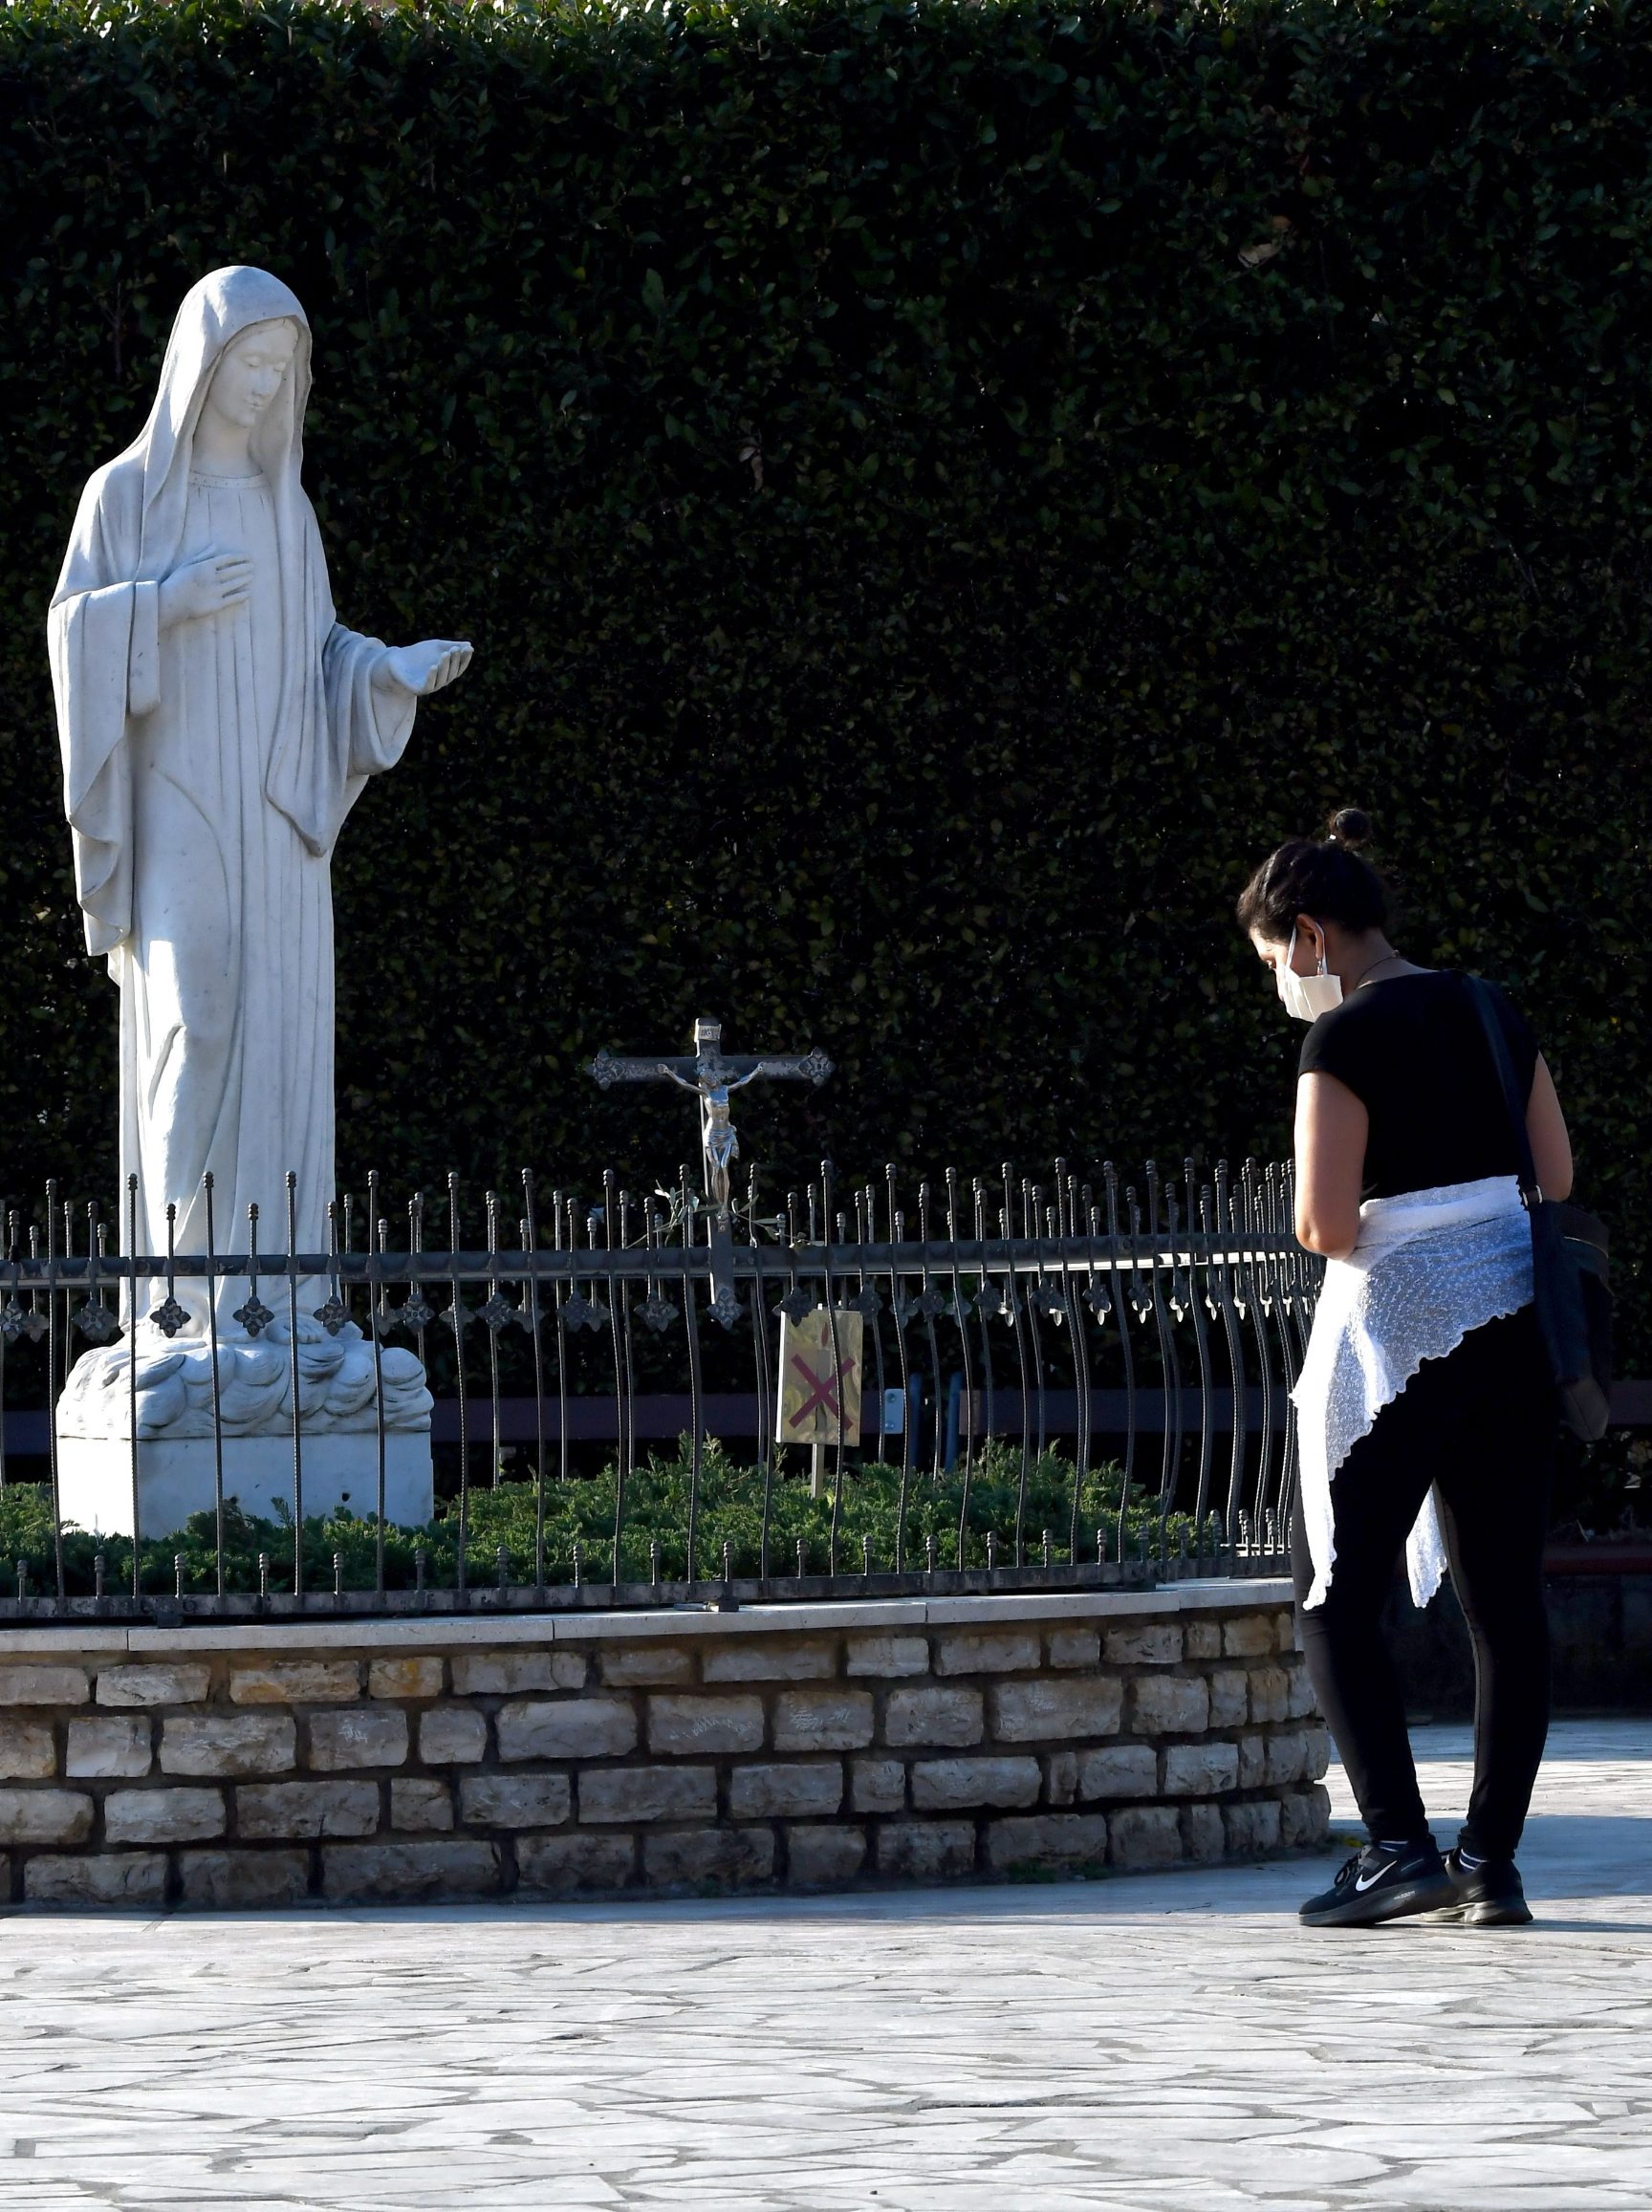 A woman prays next to a Virgin Mary sculpture, in front of the St Jacob church, usually riddled with thousands of Catholic believers, at Marian pilgrimage site, in the southern Bosnian town of Medjugorje, on April 7, 2020 during a lockdown to stop the spread of COVID-19 (novel coronavirus). - Ever since the Virgin Mary was said to appear before six teenagers on a hill in Bosnia four decades ago, pilgrims have flocked to the town of Medjugorje, eager to witness a miracle. (Photo by ELVIS BARUKCIC / AFP)